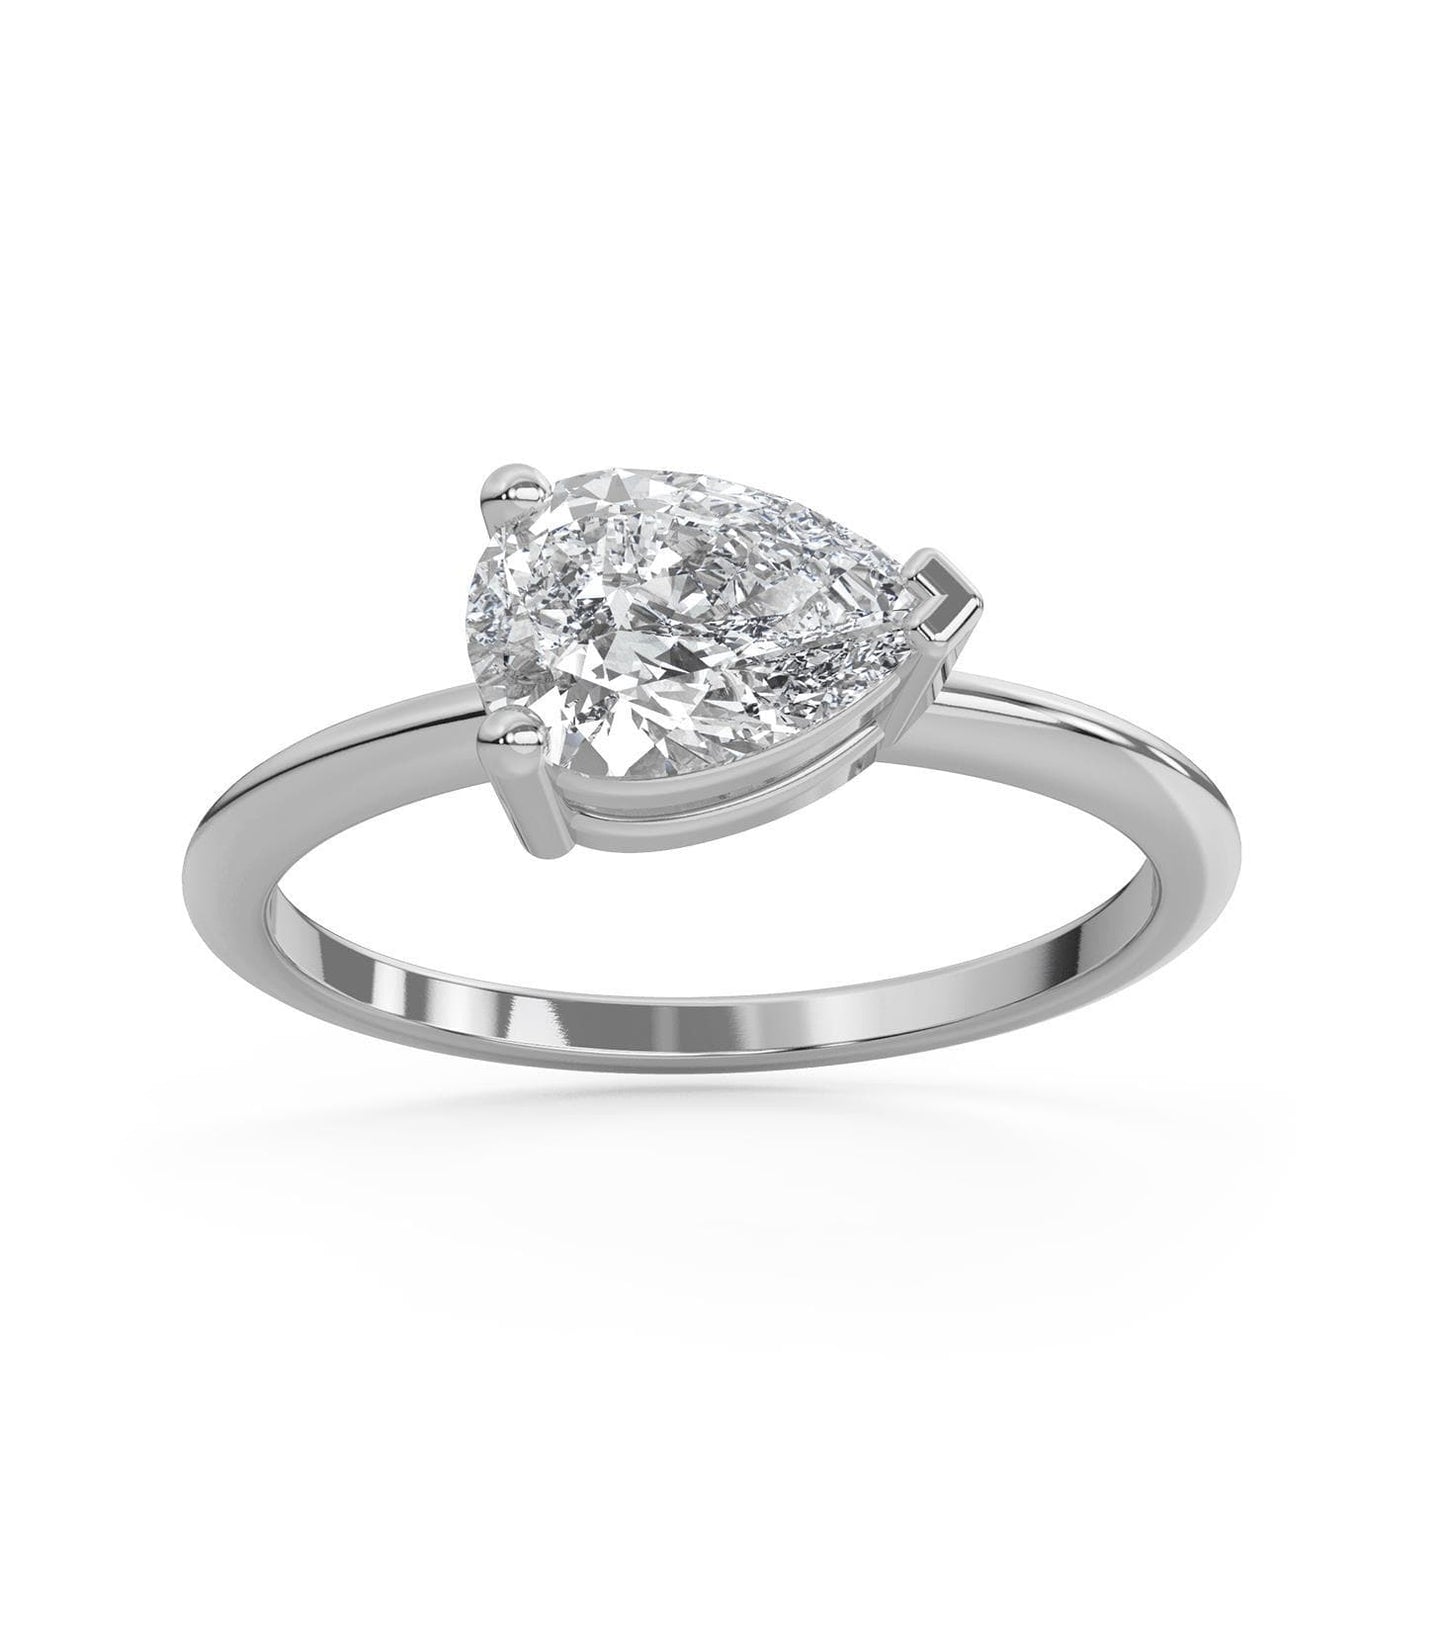 East West Pear Cut Diamond Engagement Ring